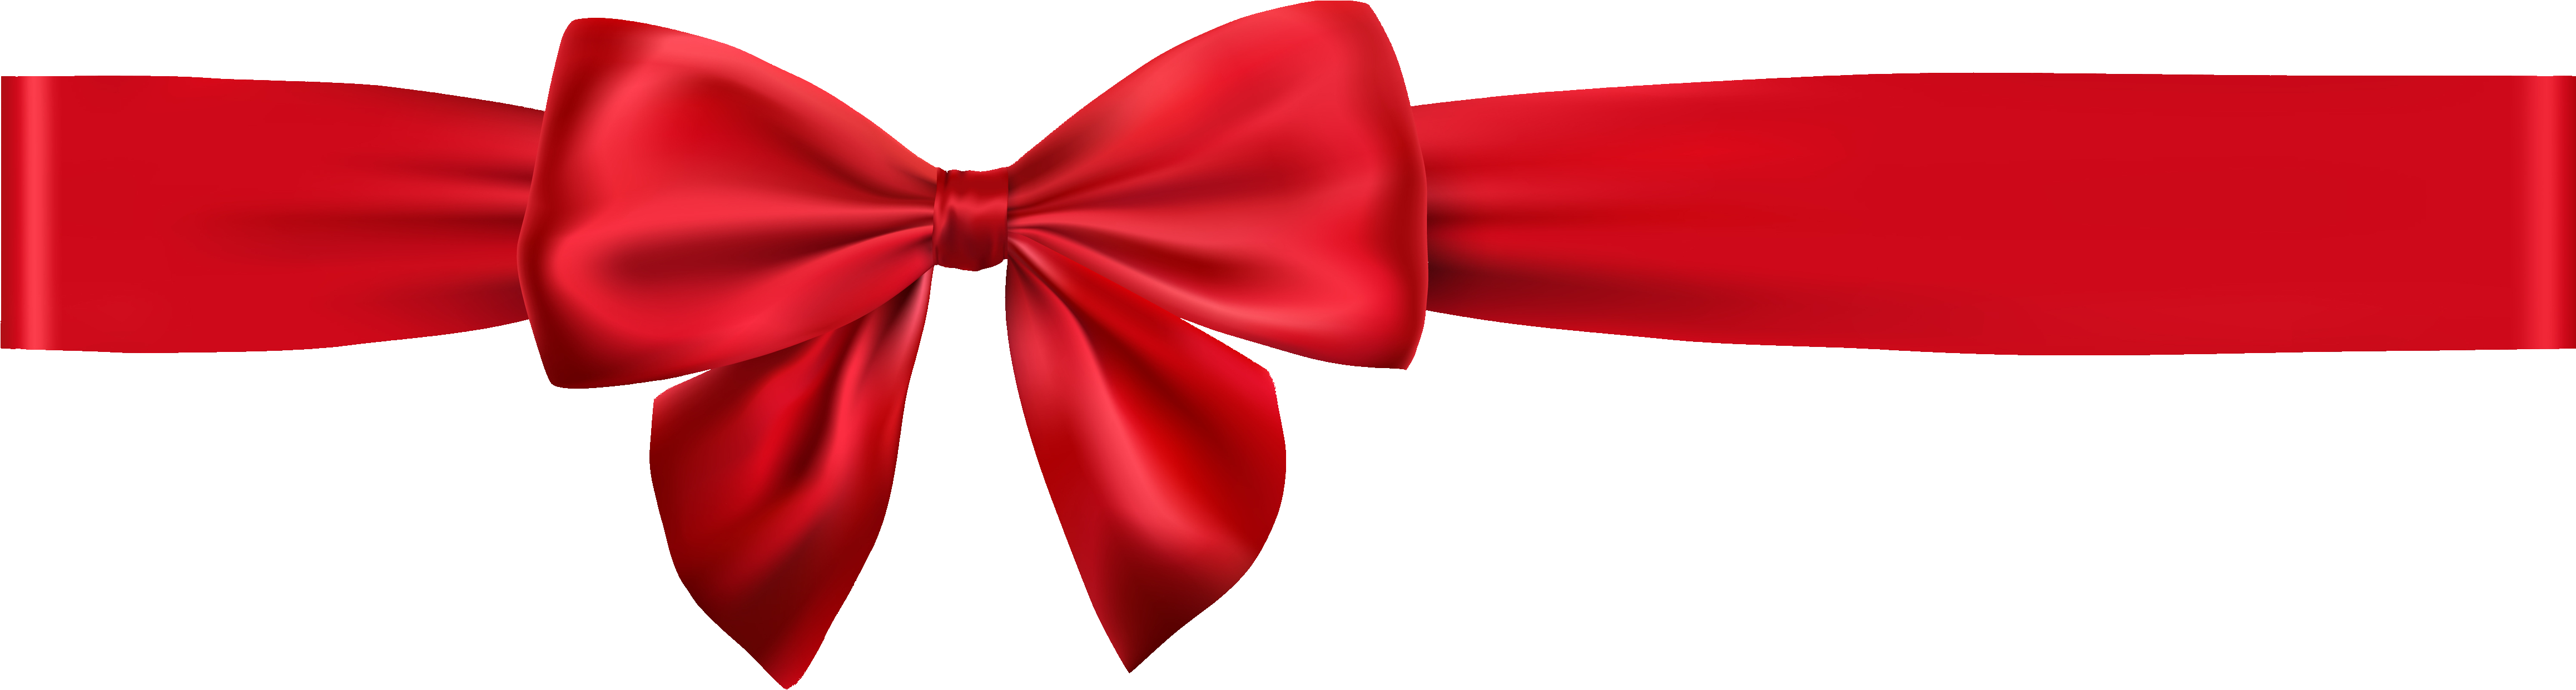 A Red Bow On A Black Background